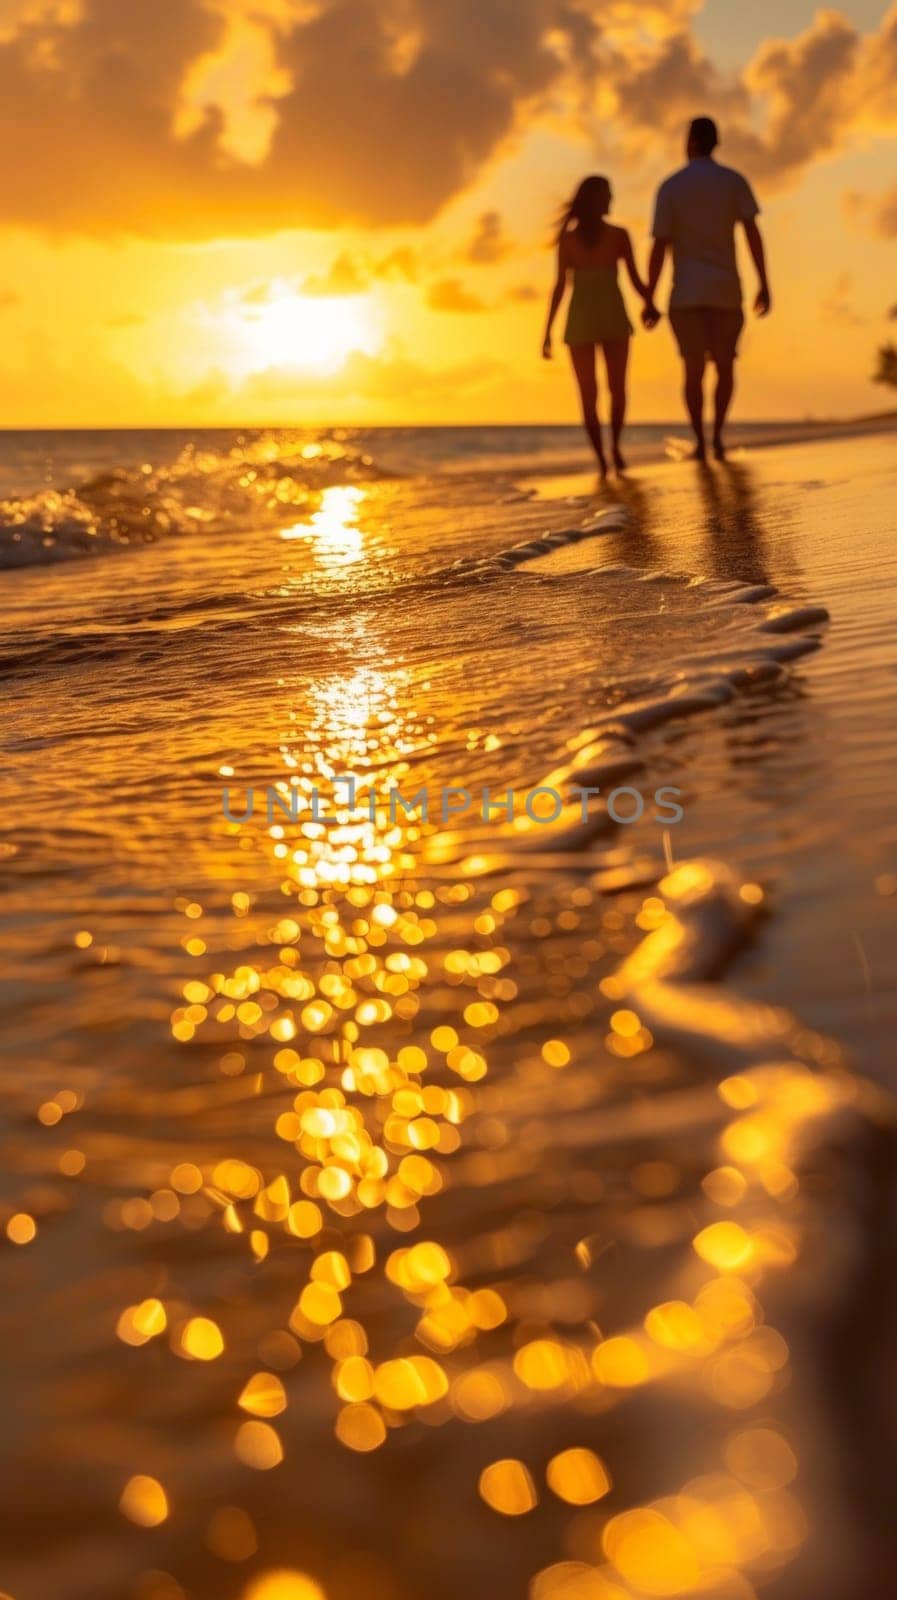 A couple walking on the beach at sunset holding hands